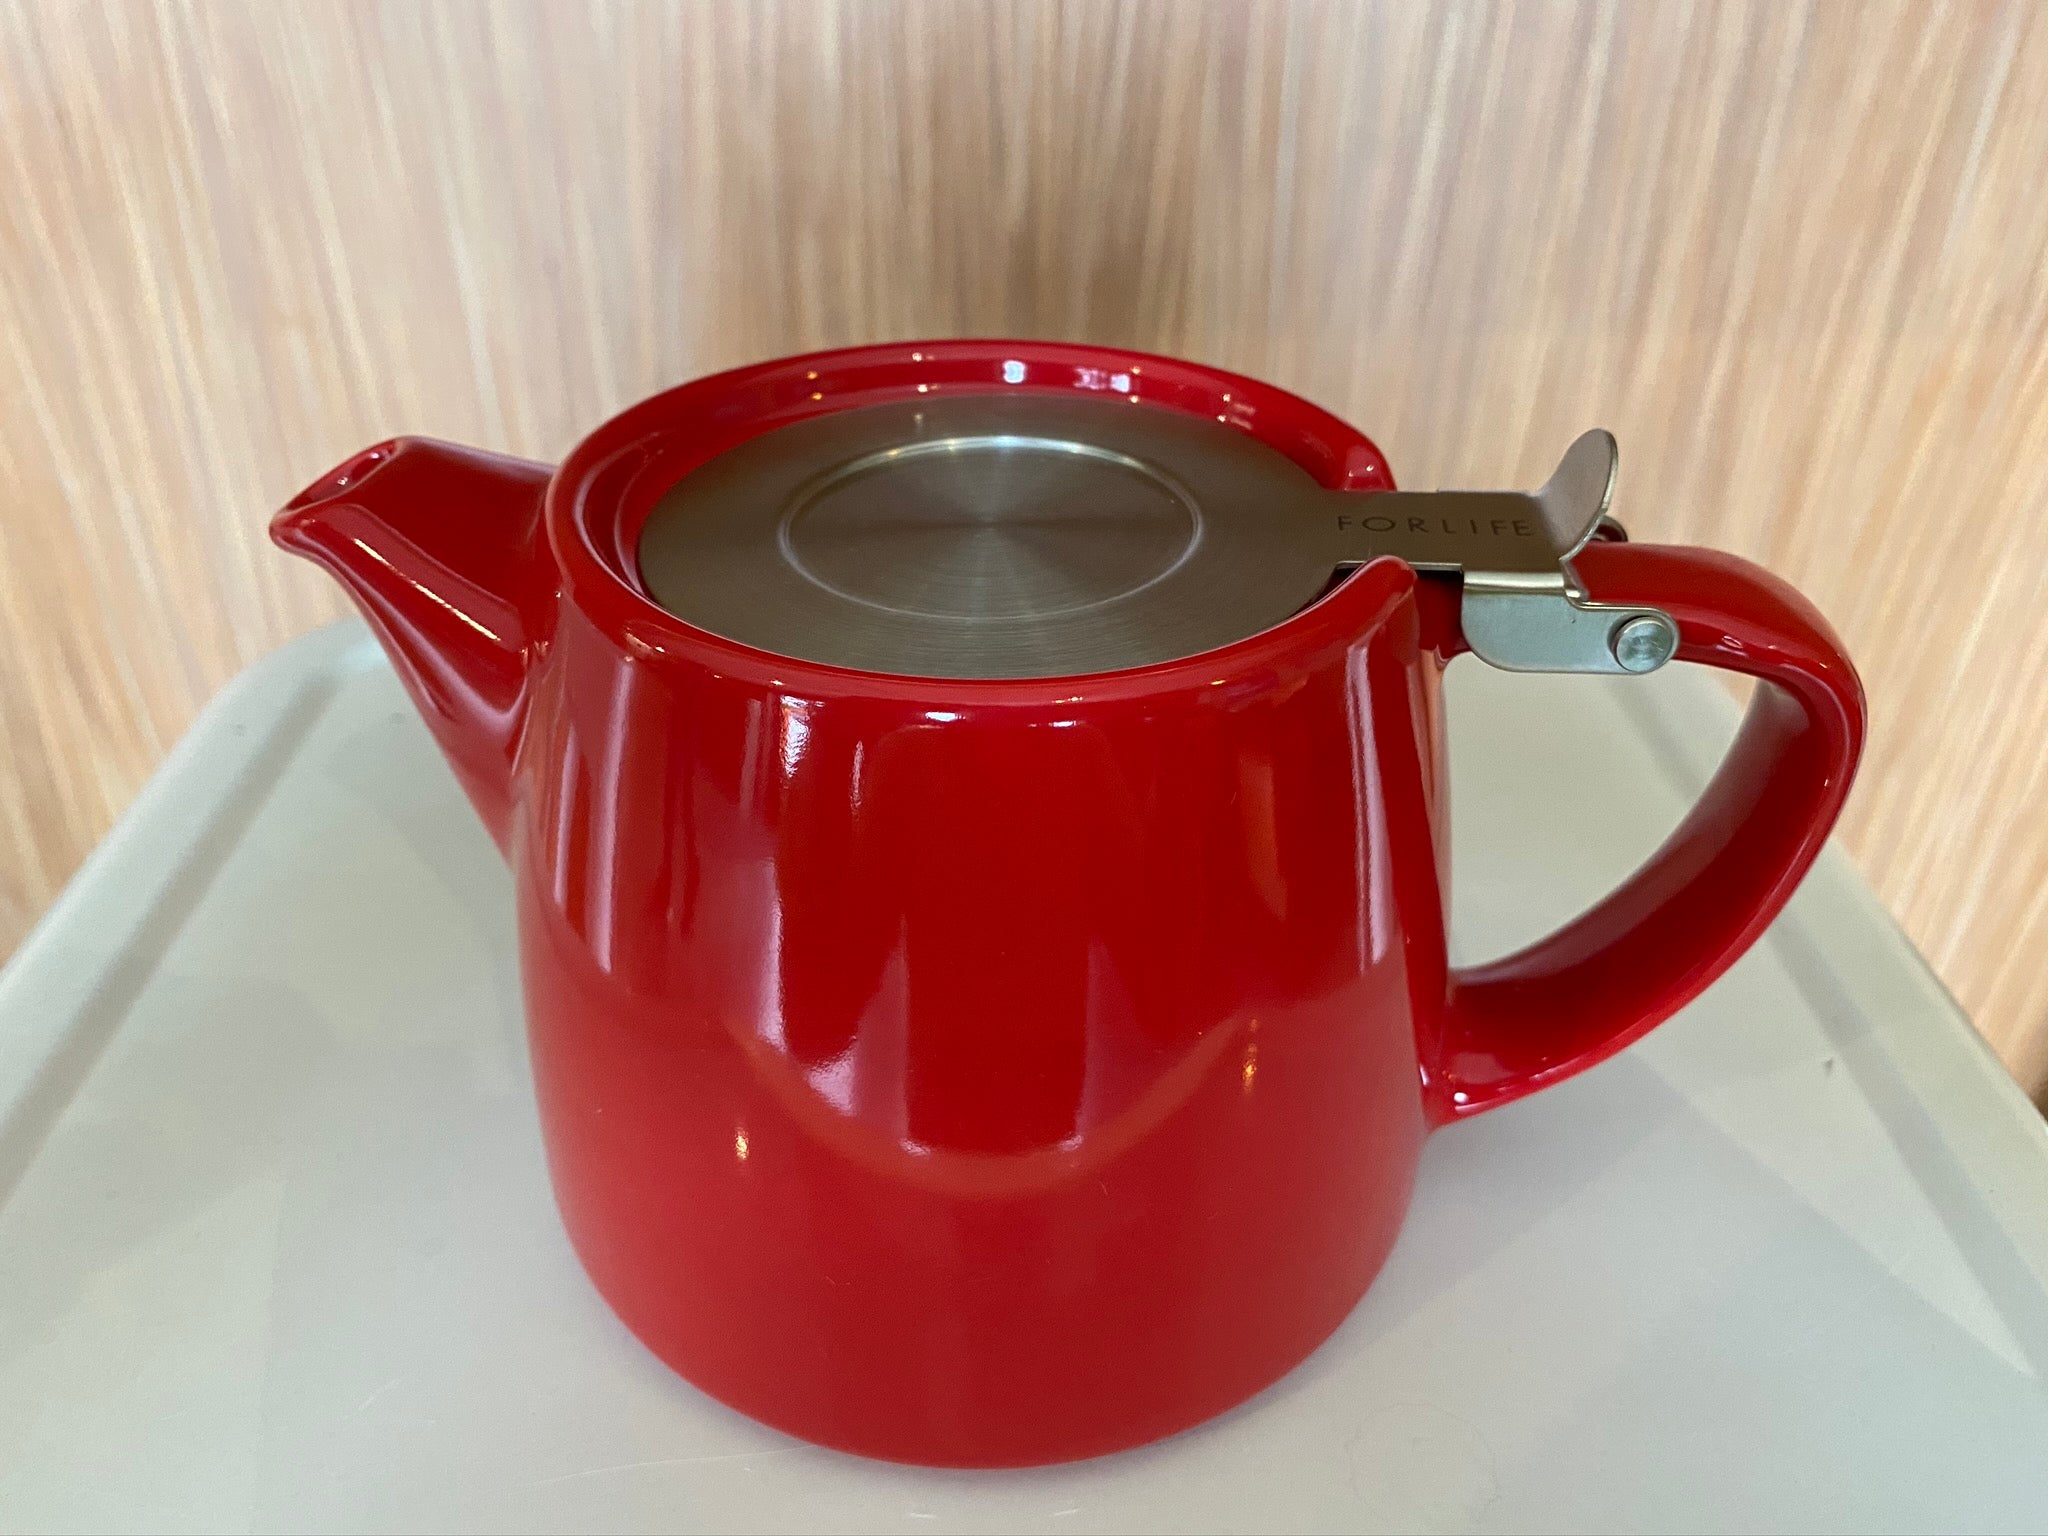 Forlife Stump Teapot with Stainless Steel Lid & Infuser, Red, 18 oz